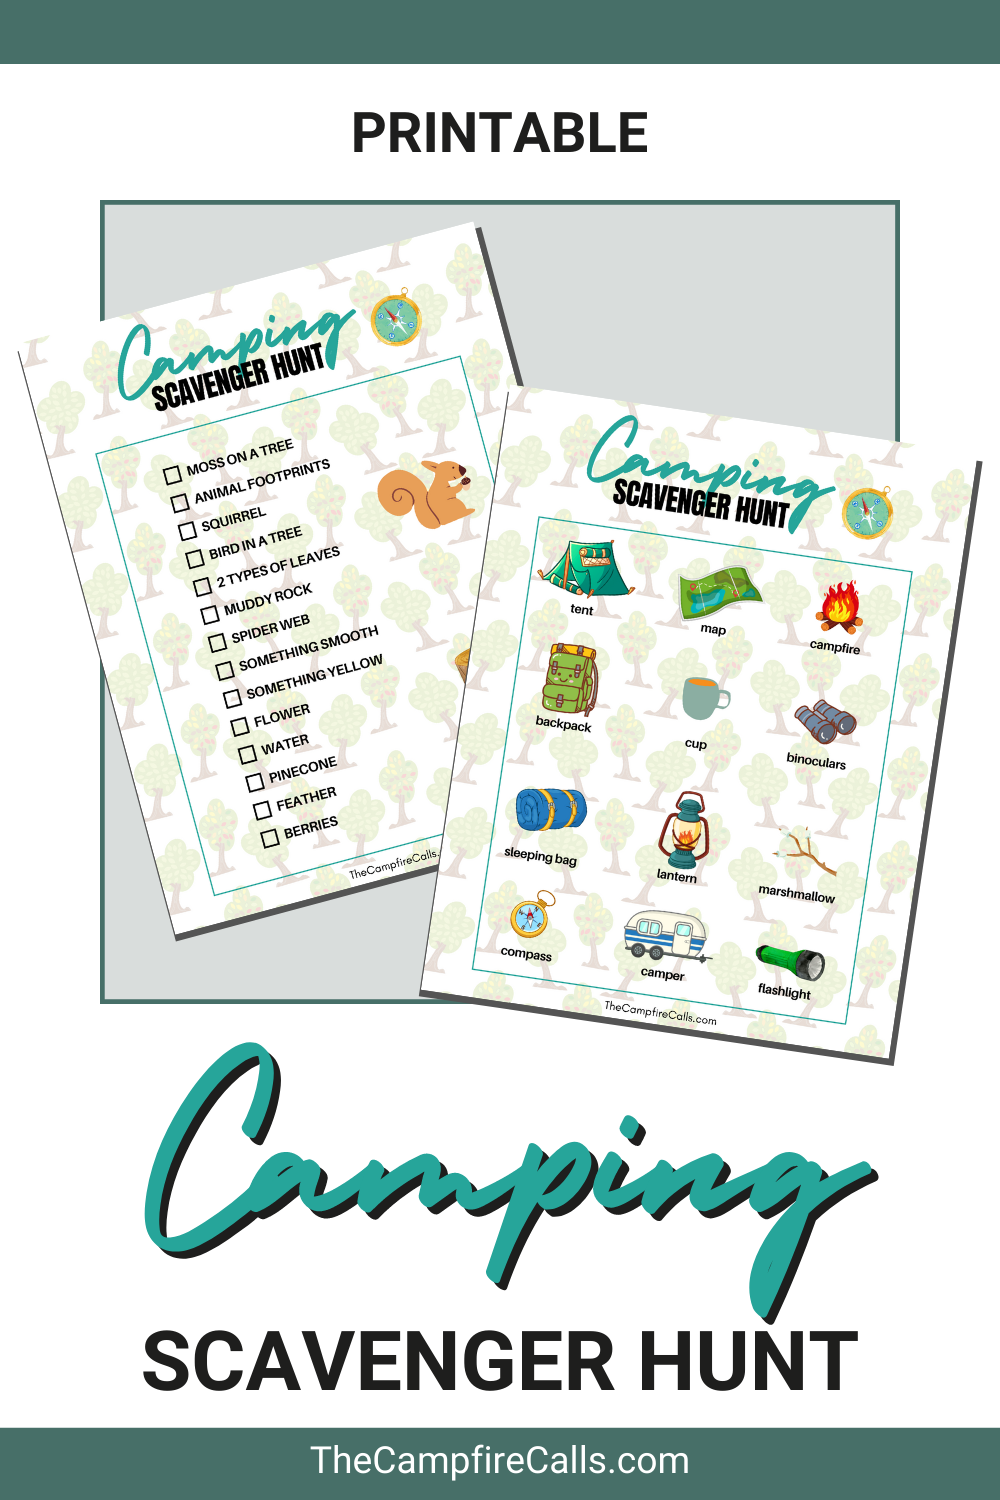 Download this free Scavenger Hunt Printable Set and create a fun and memorable camping trip while enjoying the great outdoors.